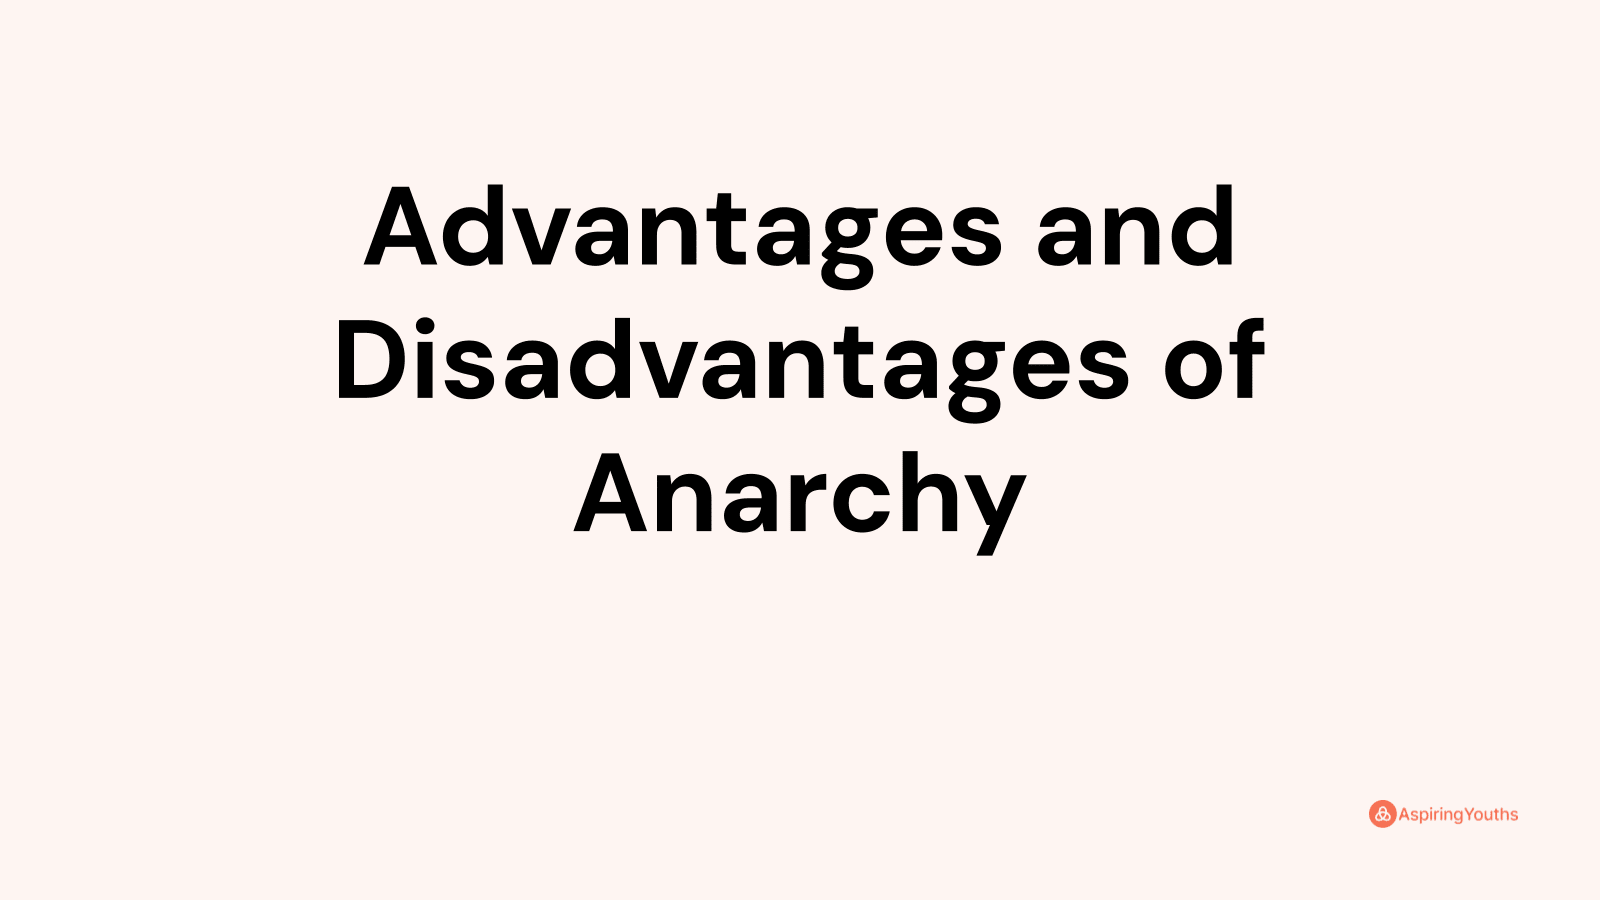 Advantages and disadvantages of Anarchy